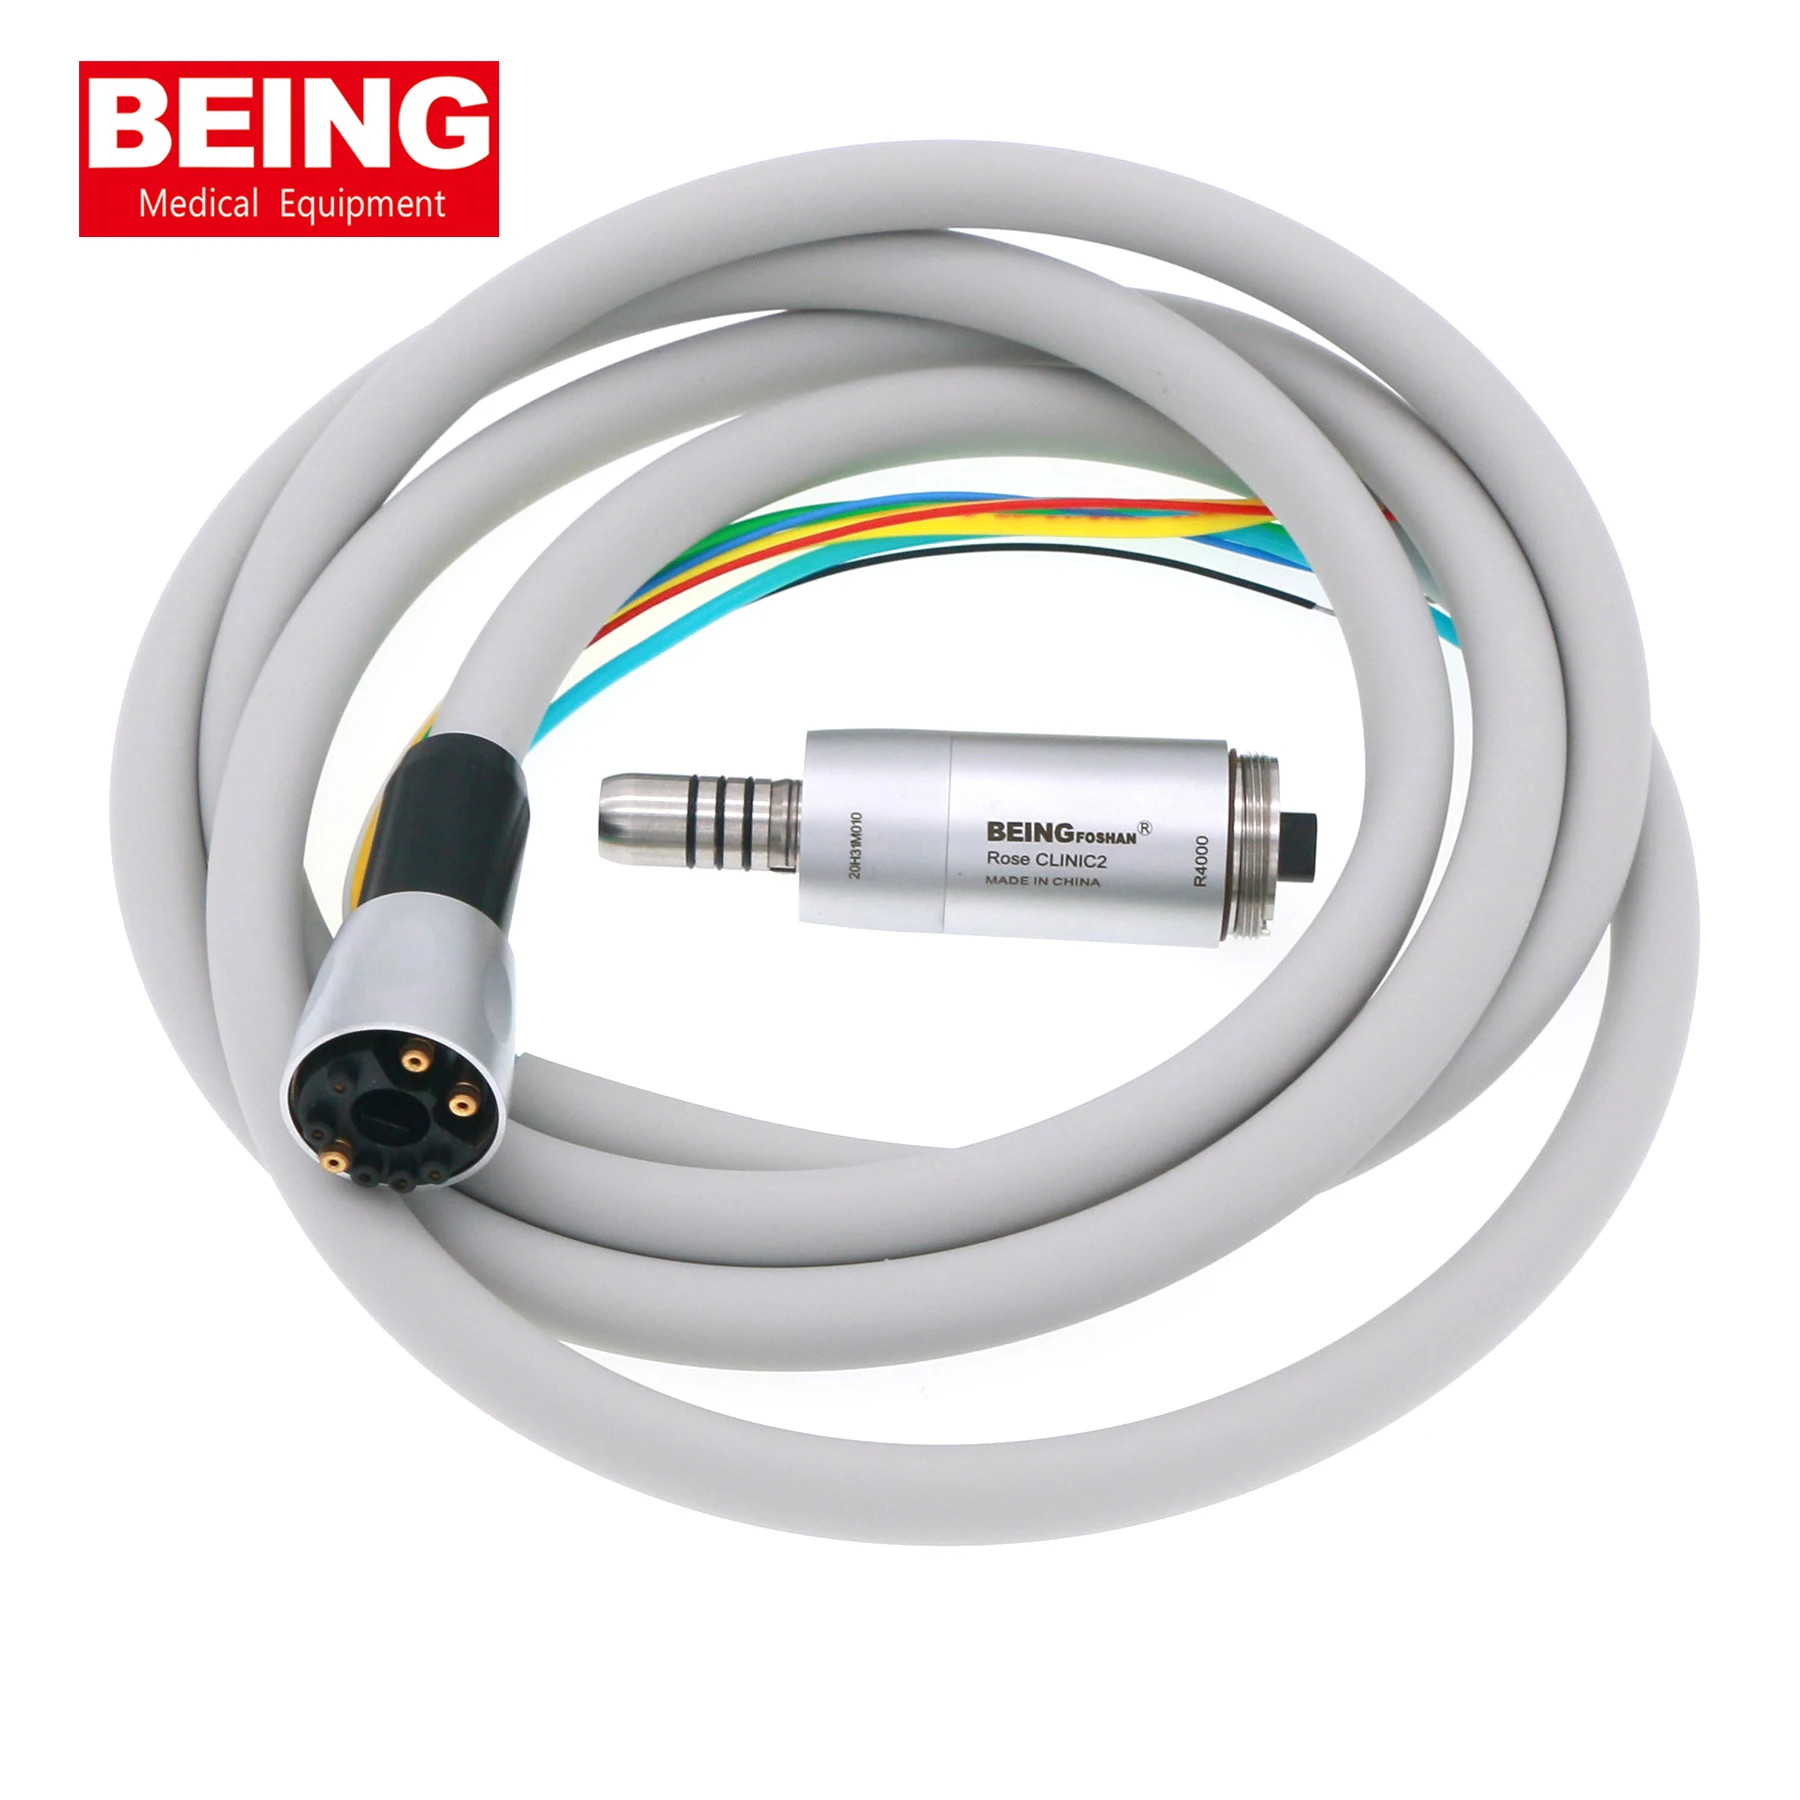 BEING Dental Brushless Electric LED Micro Motor R4000 Built in Tube Cable For Contra Angle Handpiece Fit KAVO NSK